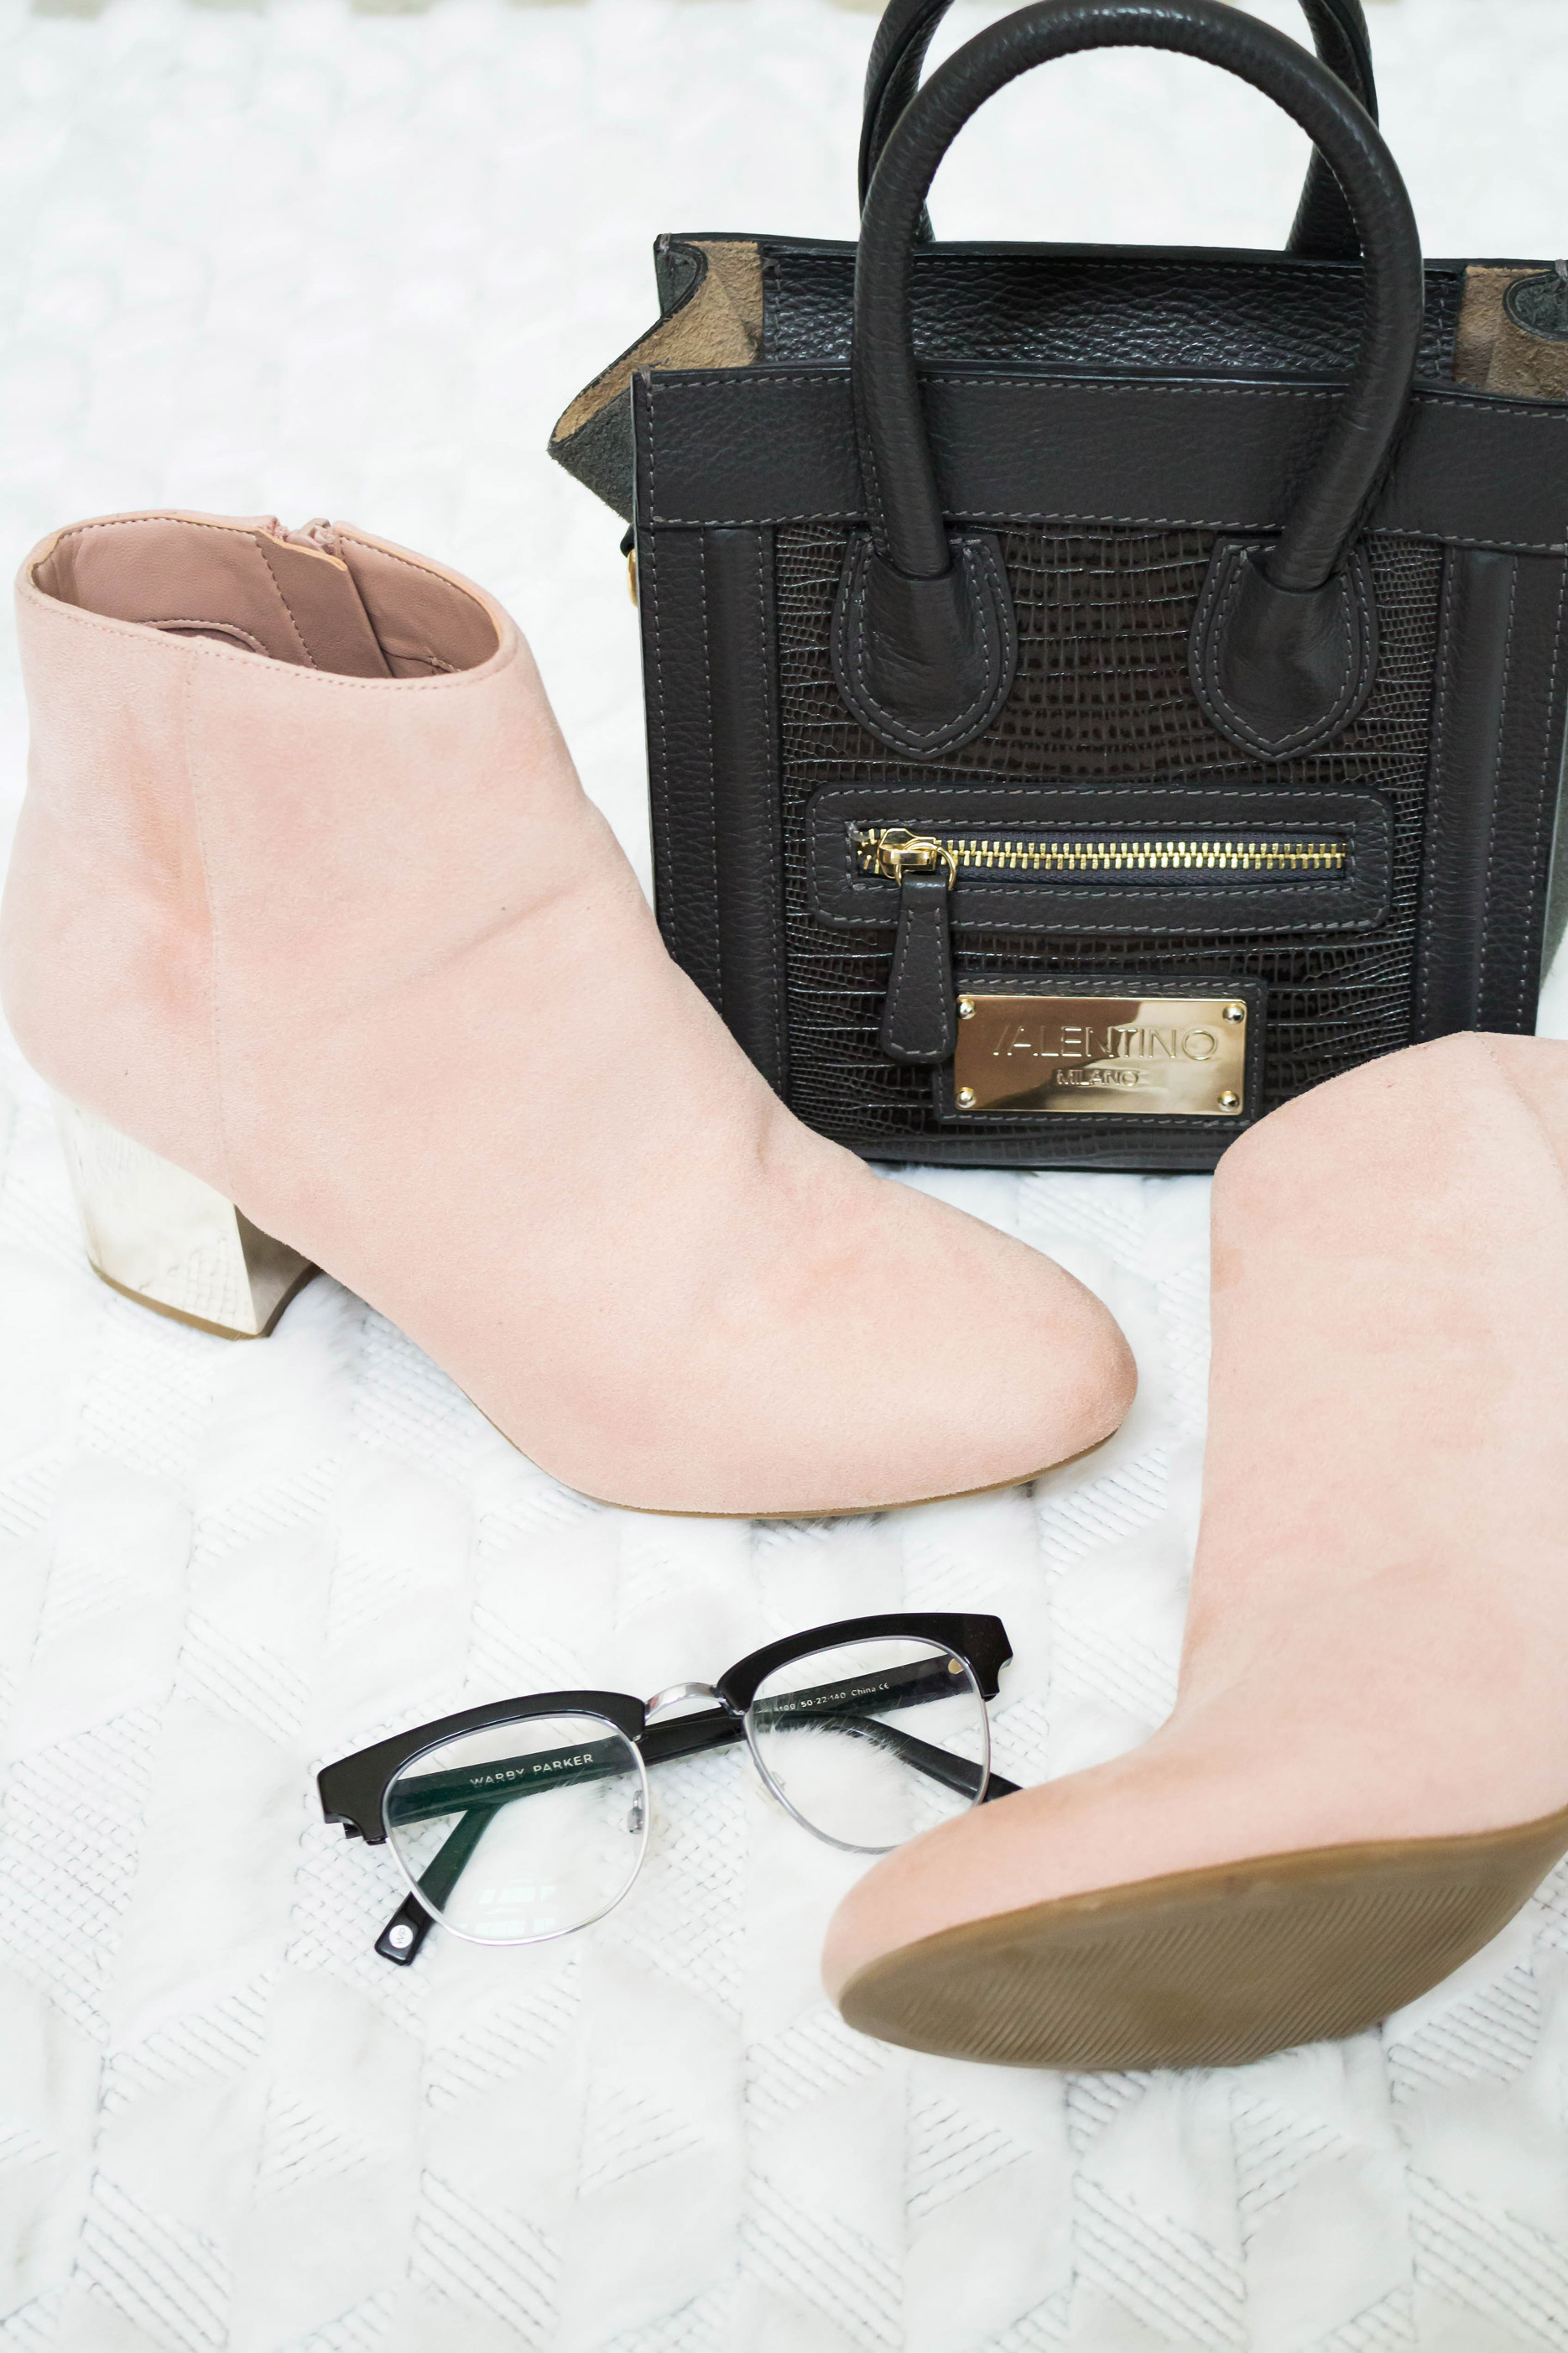 TJ Maxx Yellow Tag Clearance and Blush Pink Booties